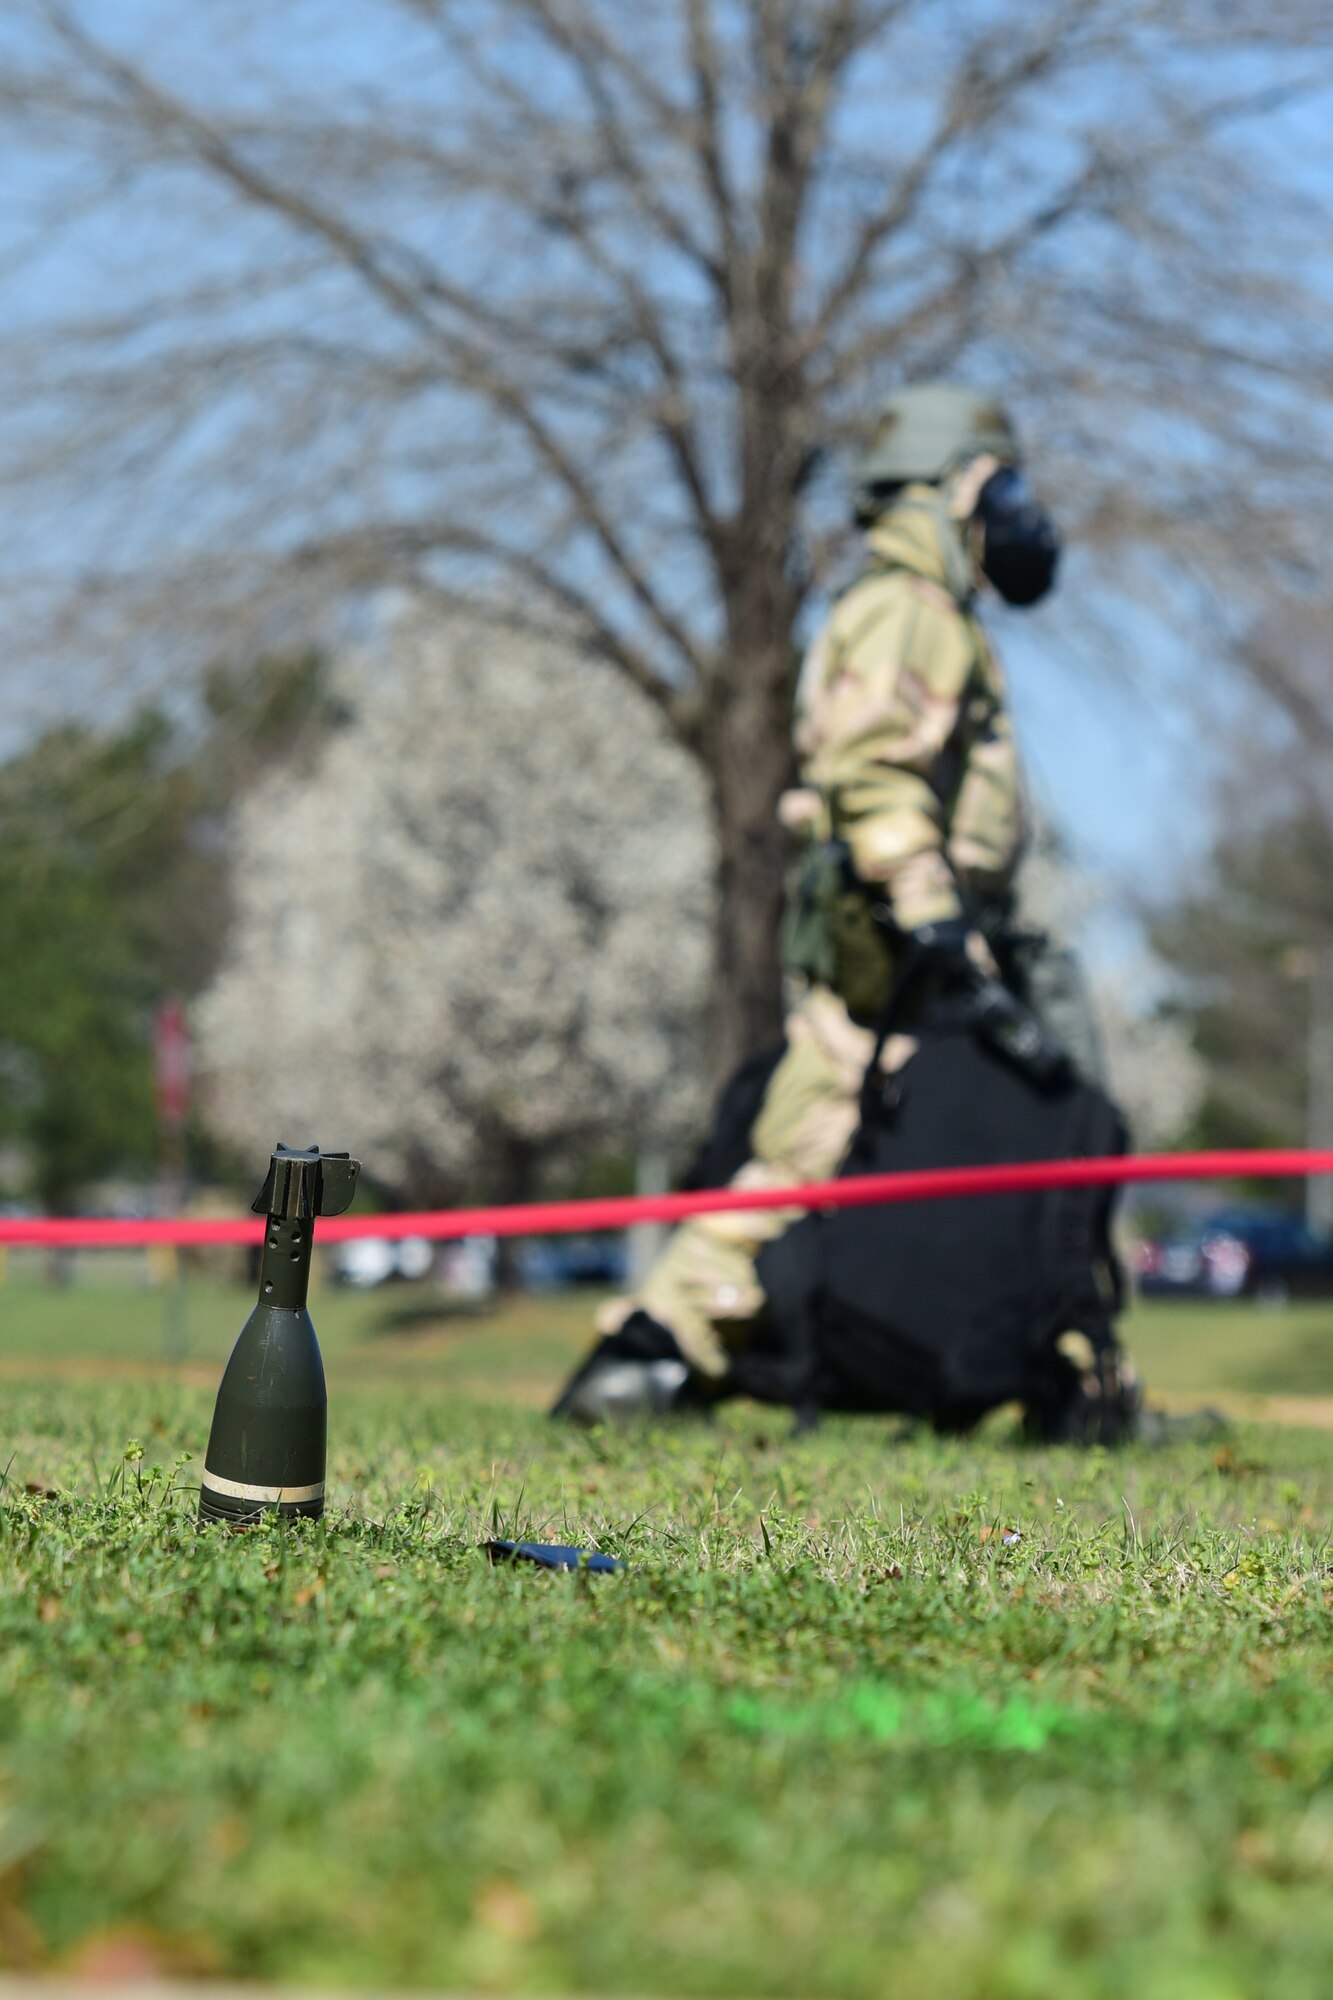 U.S. Air Force Airmen, assigned to the South Carolina Air National Guard’s 169th Fighter Wing, participate in an exercise that measures the ability to survive and operate in chemical warfare equipment at McEntire Joint National Guard Base, S.C., March 3, 2018. Swamp Fox Airmen continue to hone routine skills to meet combatant command requirements. The muscle memory that is formed by using this equipment multiple times allows Airmen the ability to focus their attention on completing the mission under austere conditions.  (U.S. Air National Guard photo by Senior Airman Megan Floyd)